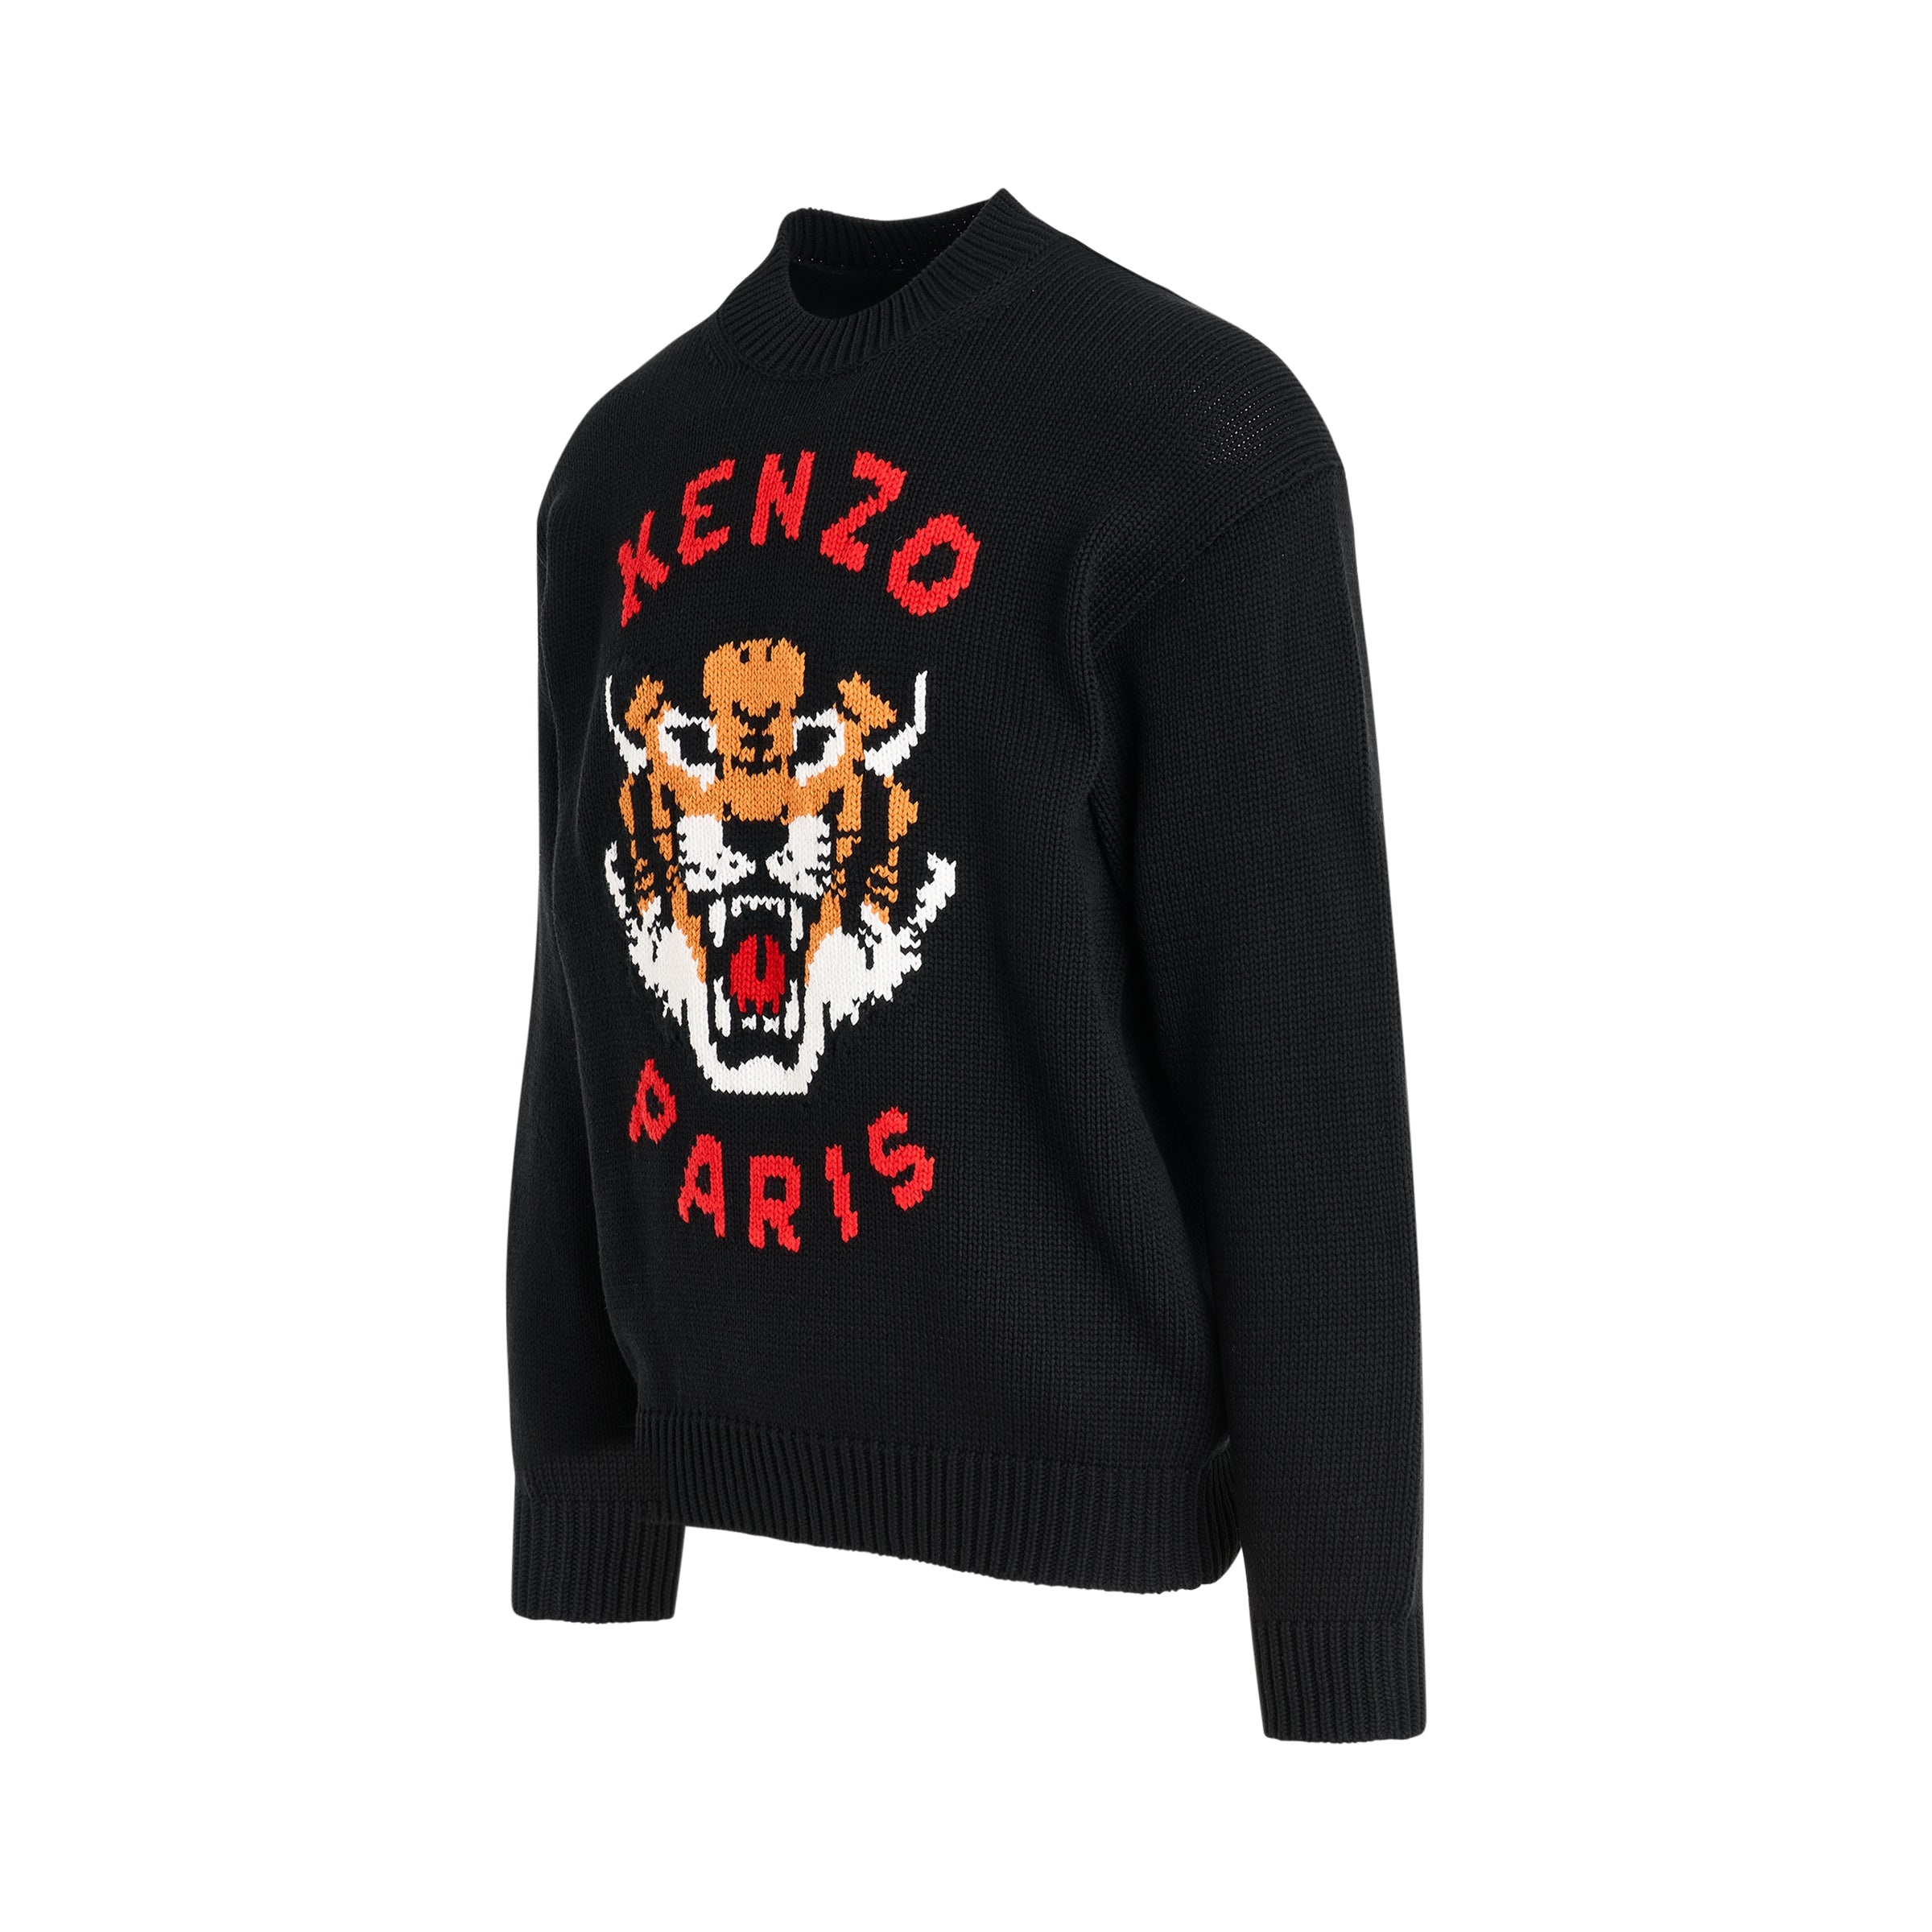 Kenzo Lucky Tiger Knit Sweater in Black - 2